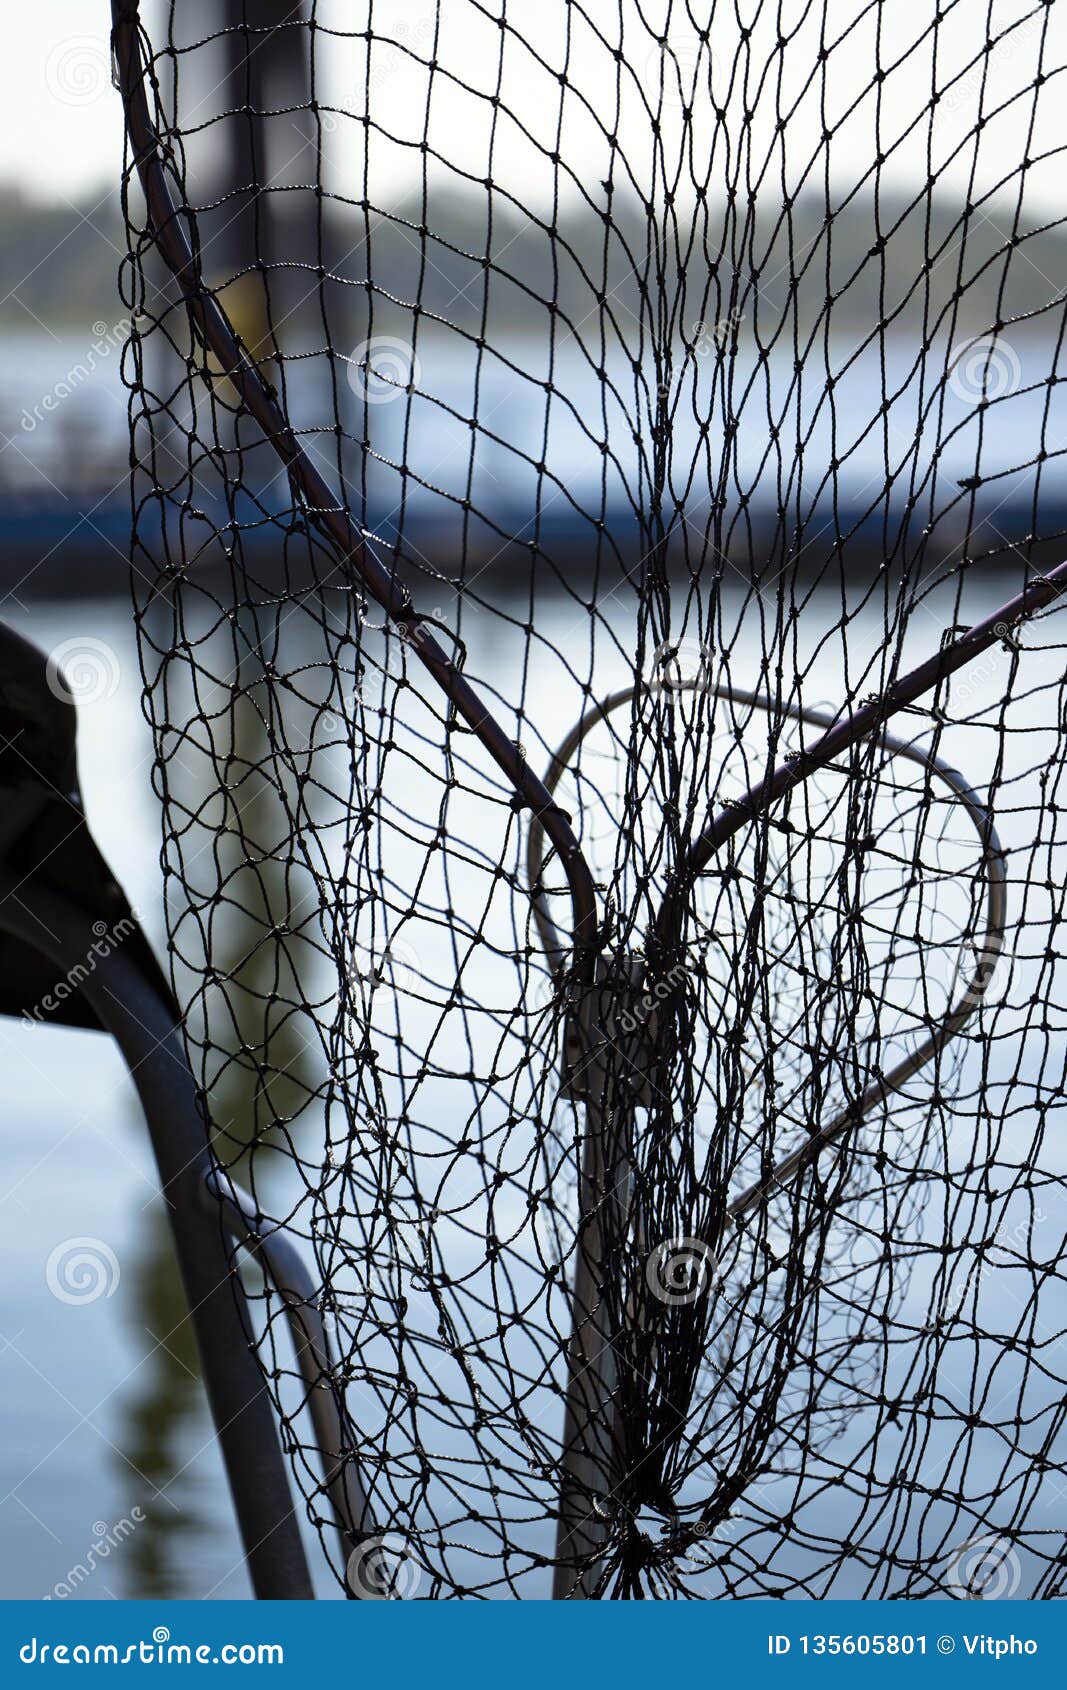 Big and Small Fishing Nets for Hooking Fish Stock Image - Image of